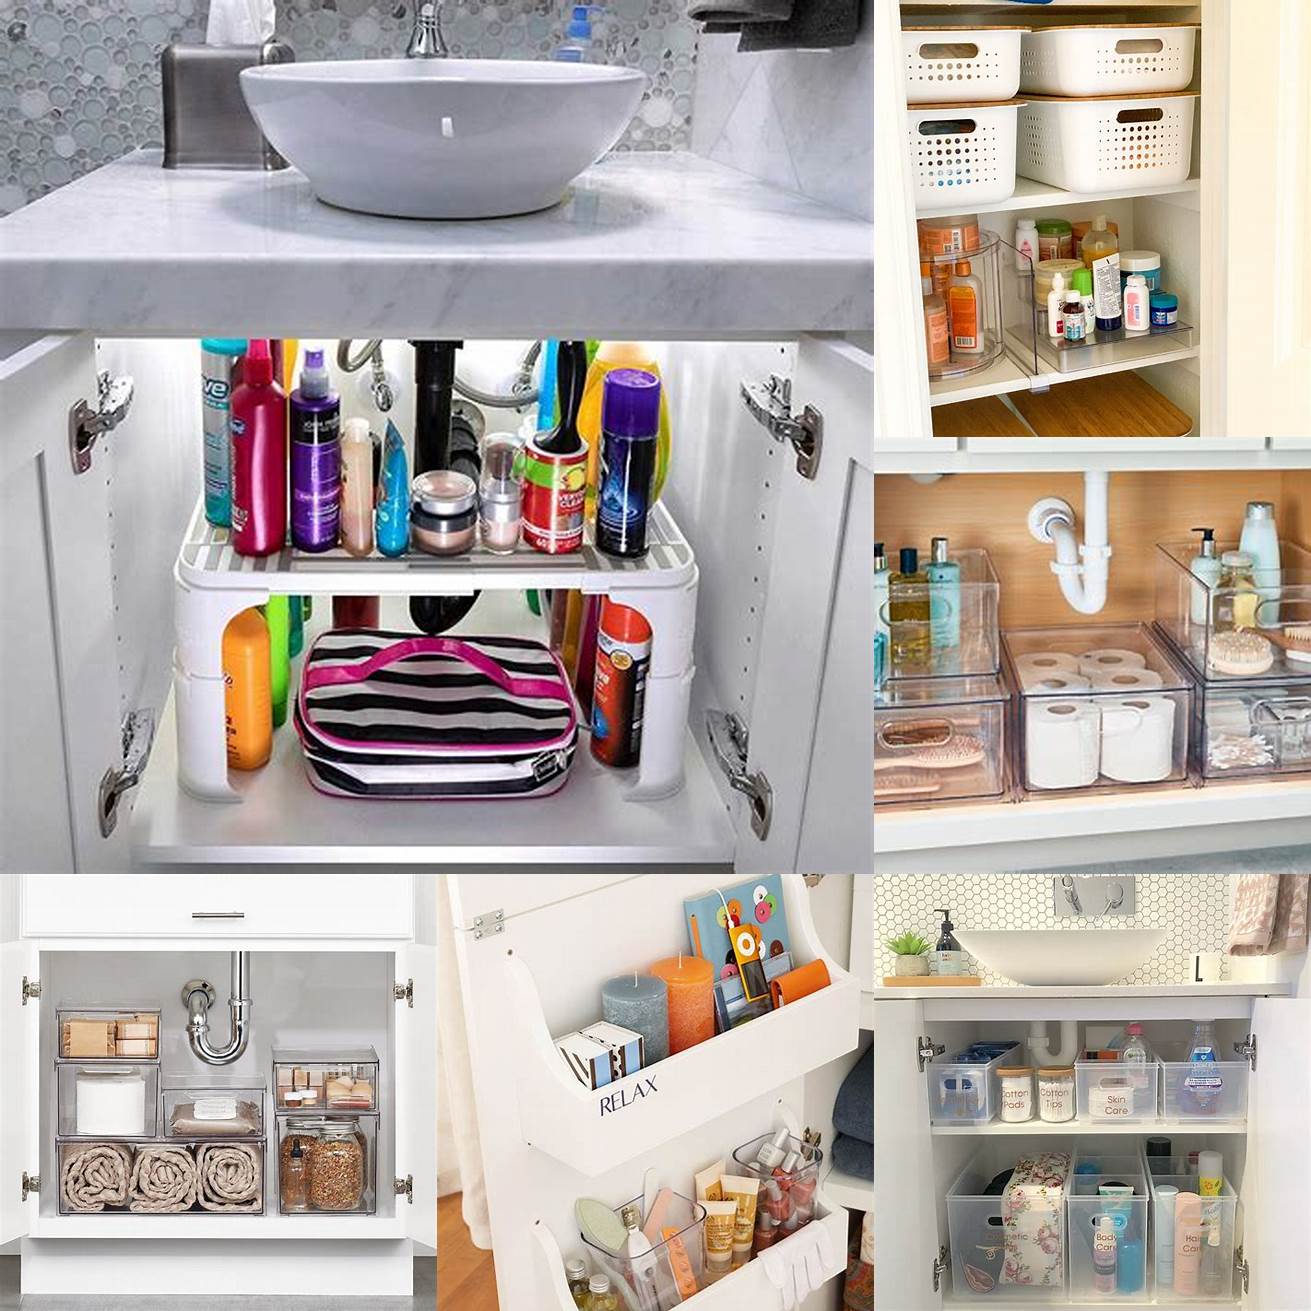 Ample storage space to keep your bathroom essentials organized